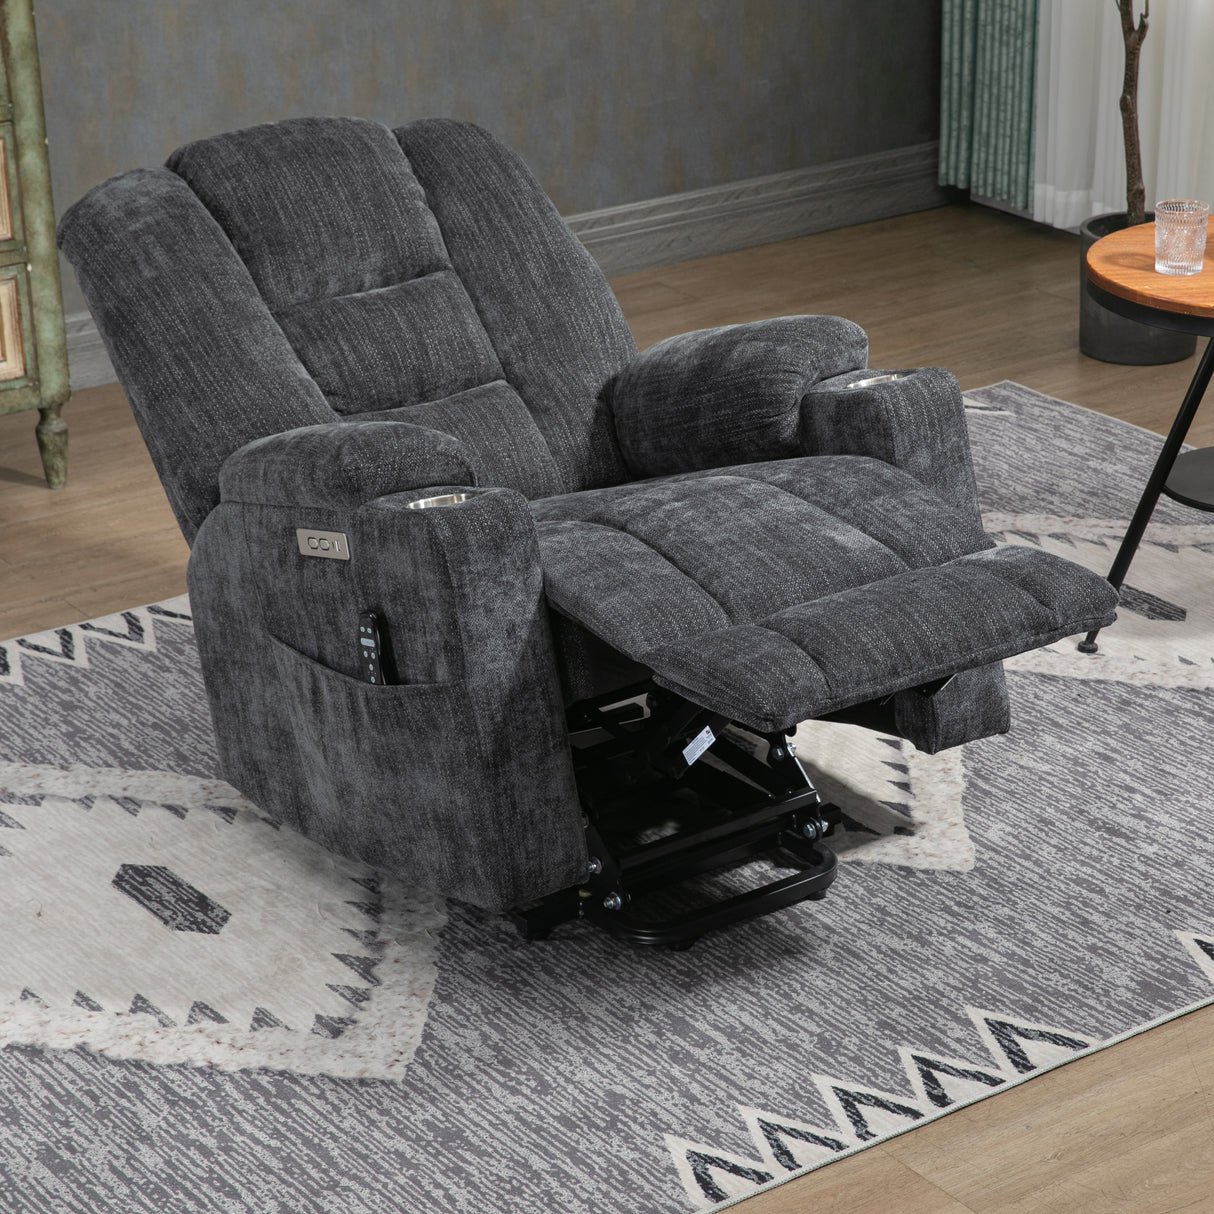 EMON'S Large Power Lift Recliner Chair with Massage and Heat for Elderly, Overstuffed Wide Recliners, Heavy Duty Motion Mechanism with USB and Type C Ports, 2 Steel Cup Holders, Gray Home Elegance USA